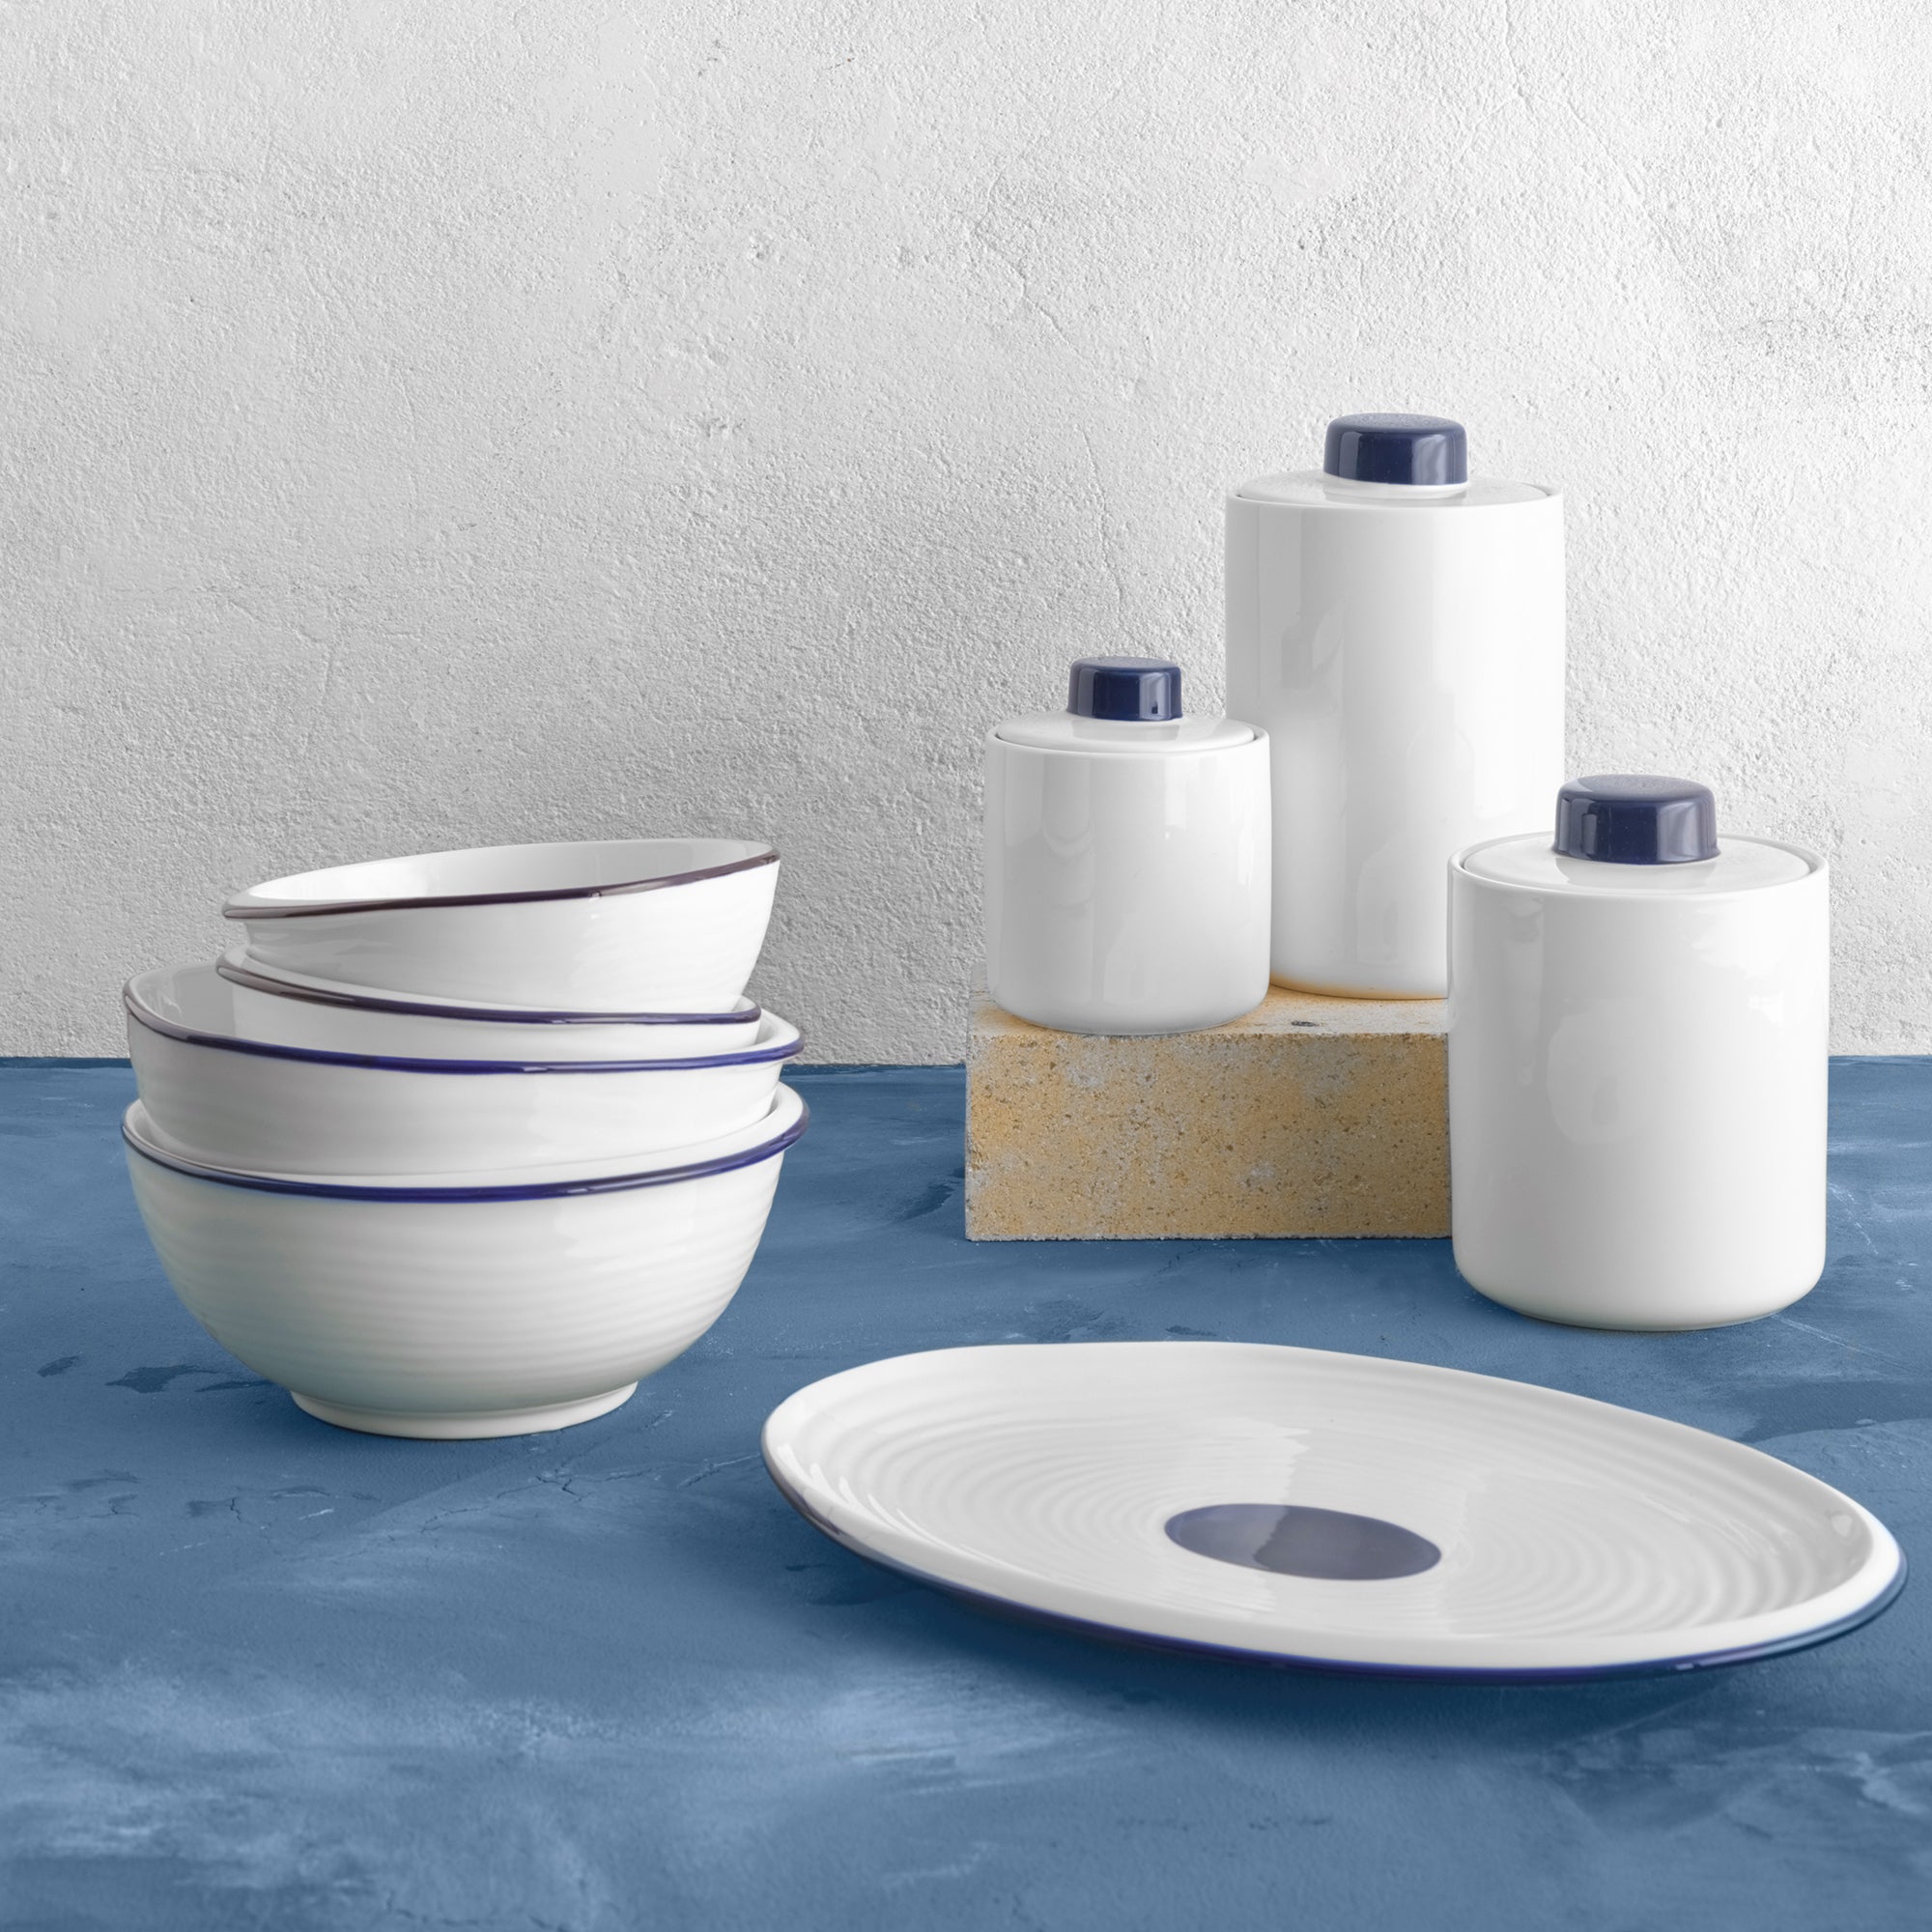 12-Inch White Serving Plate with Decorative Blue Dot - Set of Six